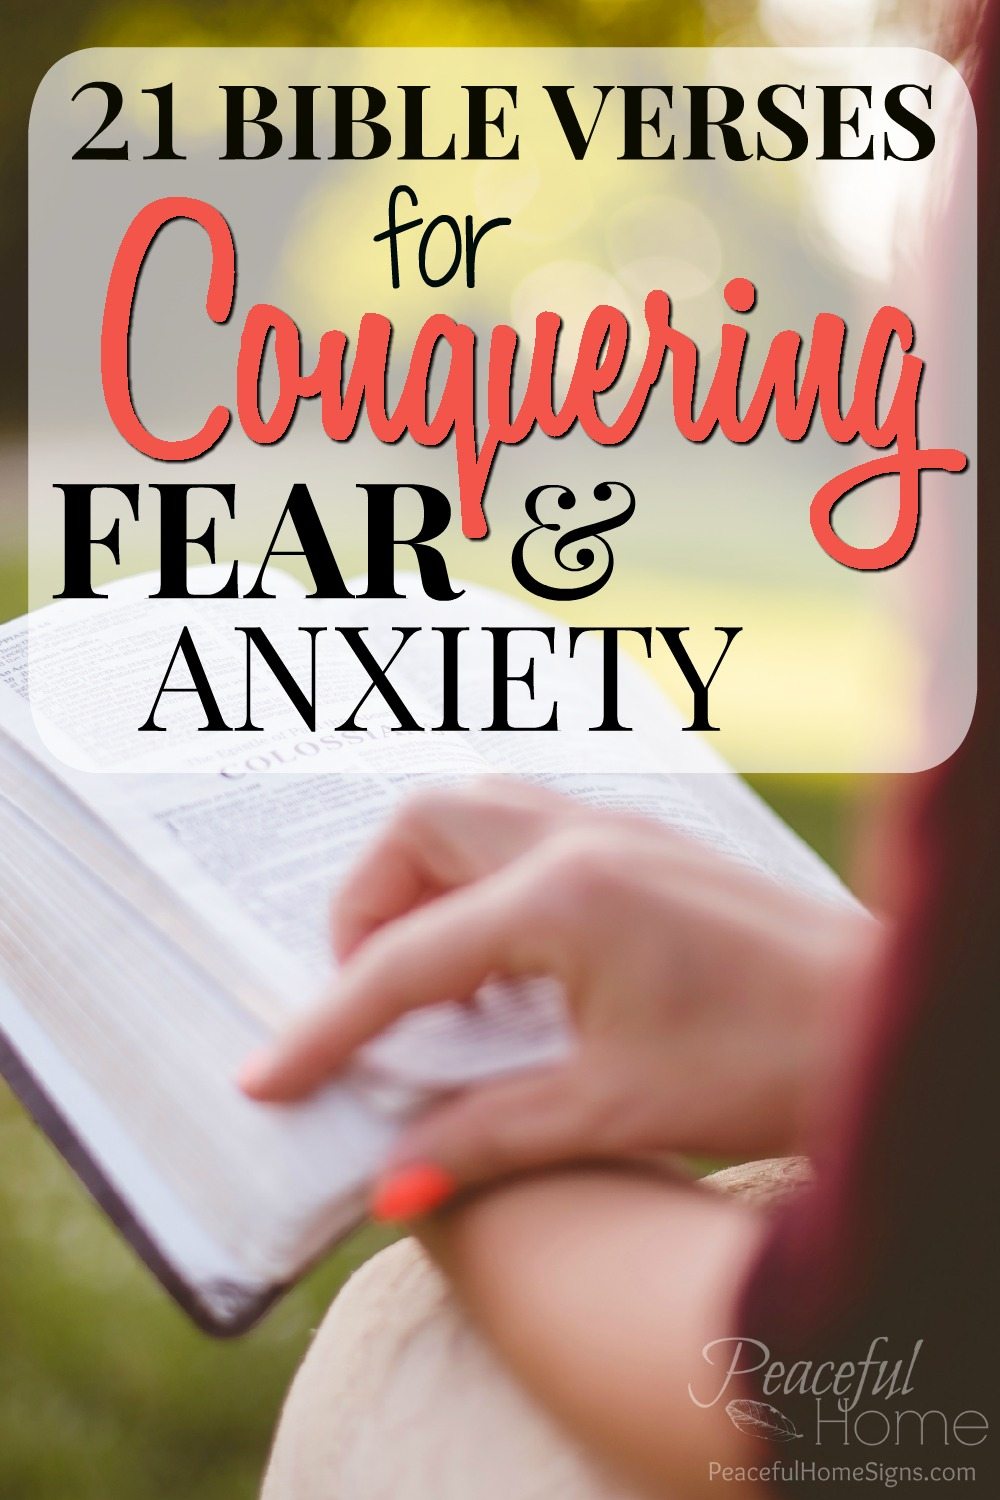 Bible Verses for fear and anxiety | Scriptures for fear | Scriptures for Worry | Bible verses for anxiety | What does the bible say about fear | How to stop being scared | Christian advice on fear and anxiety